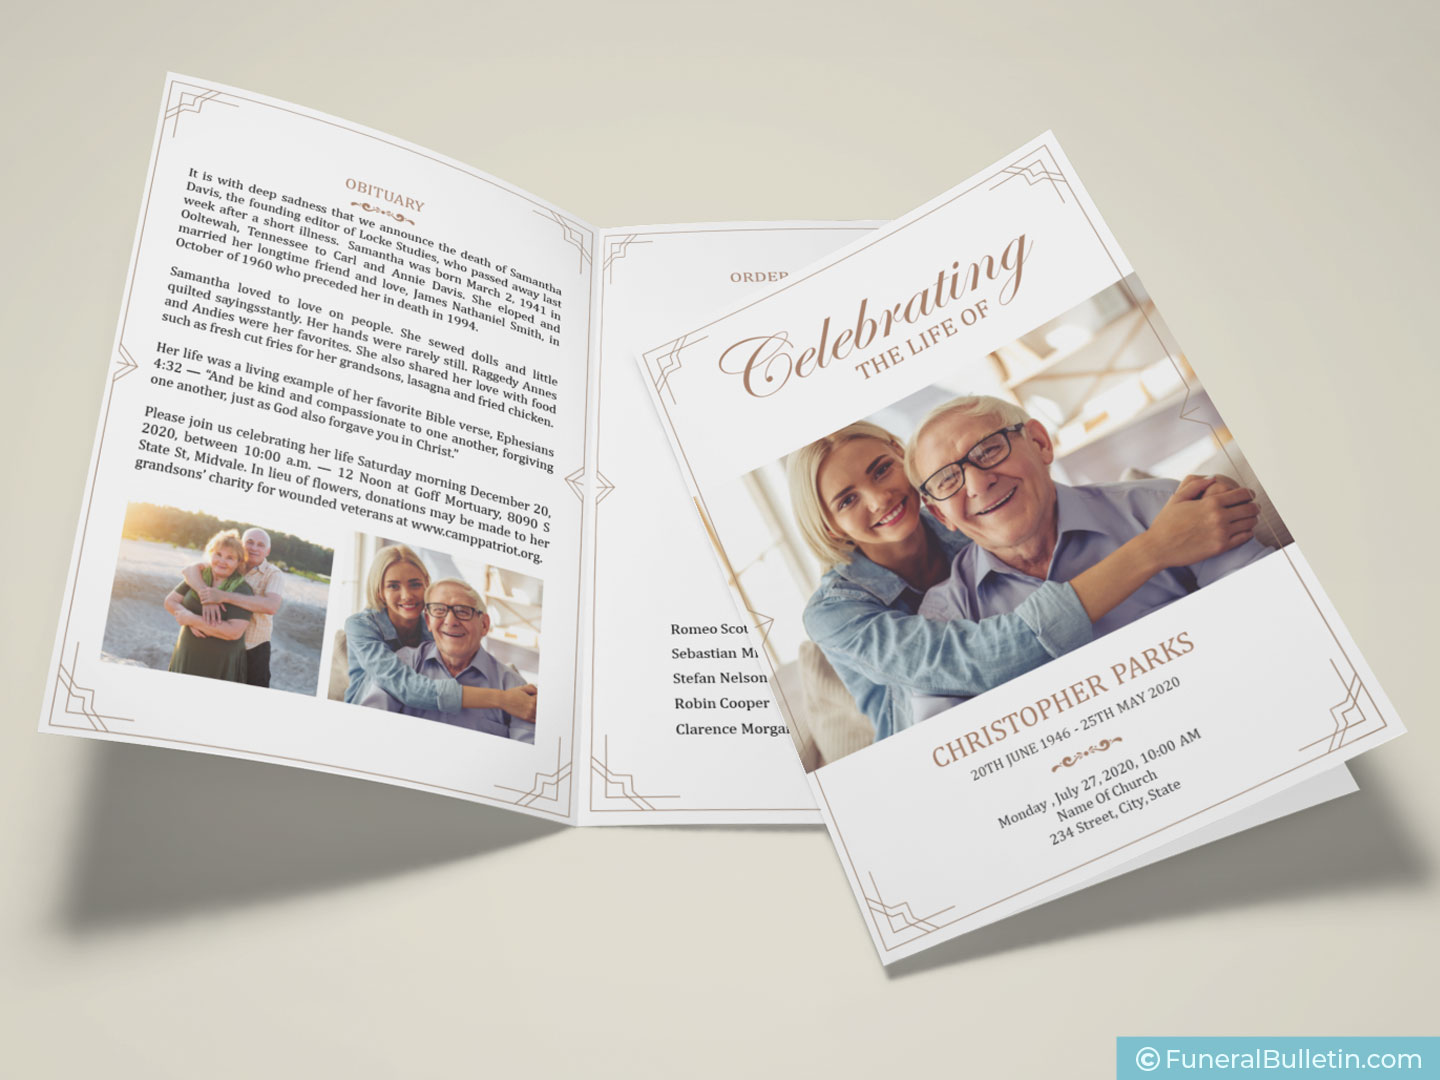 Celebration Of Life Template For A Beautiful Program DesignDownload Now!